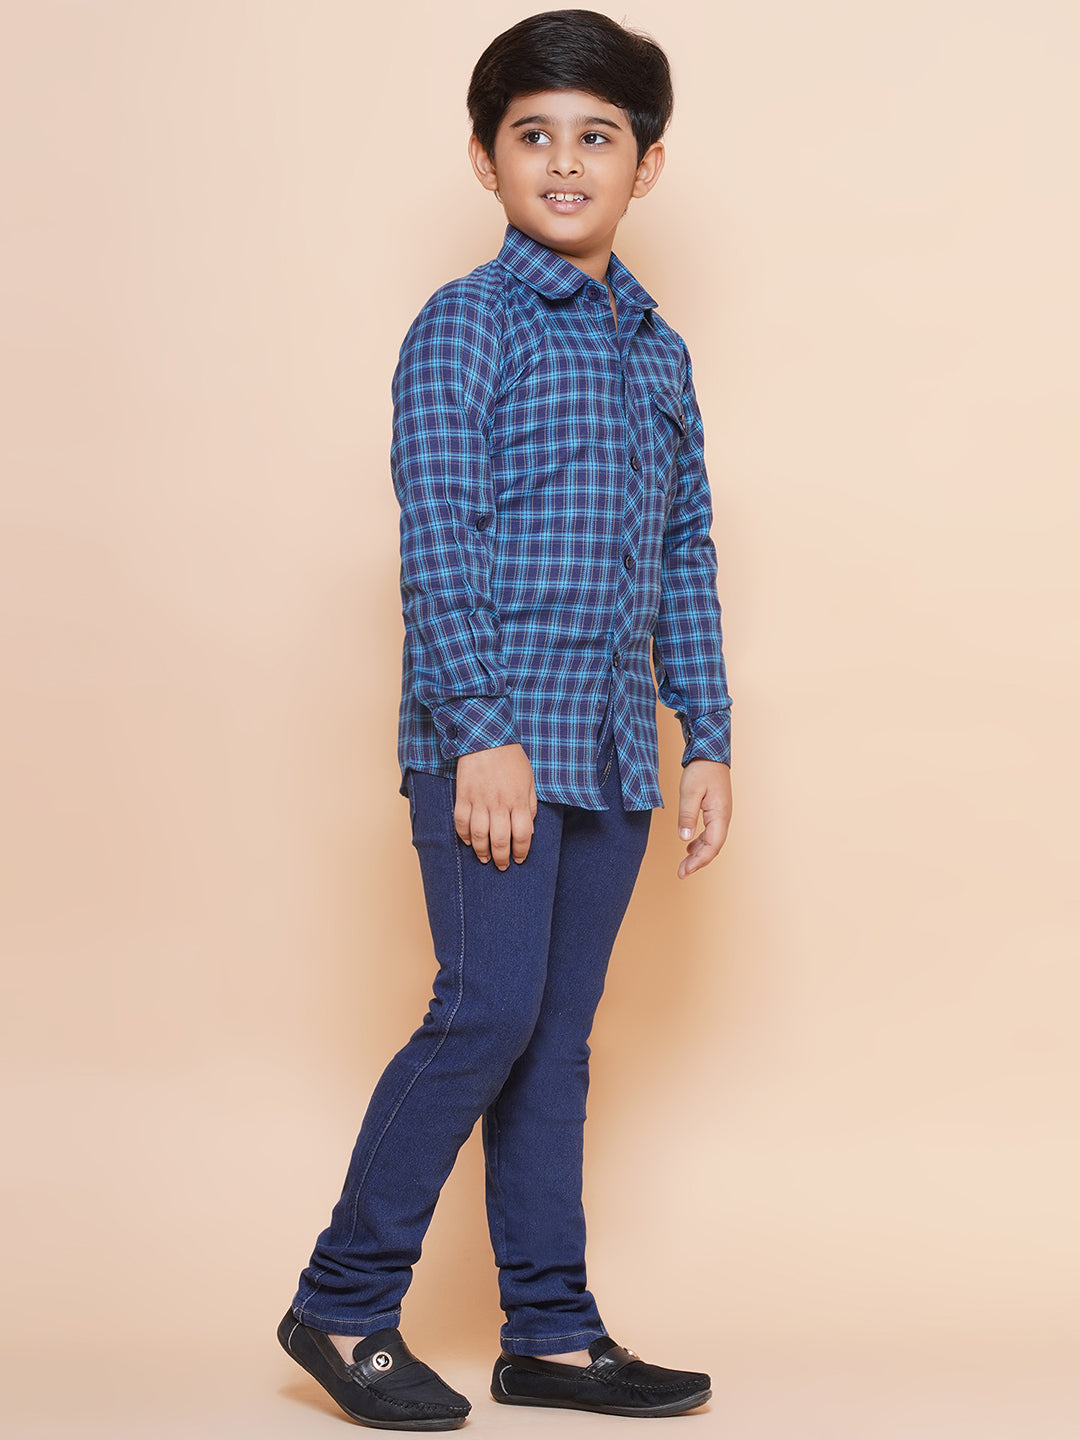 Kids Navy Blue Shirt and Jeans Clothing Set For Boys